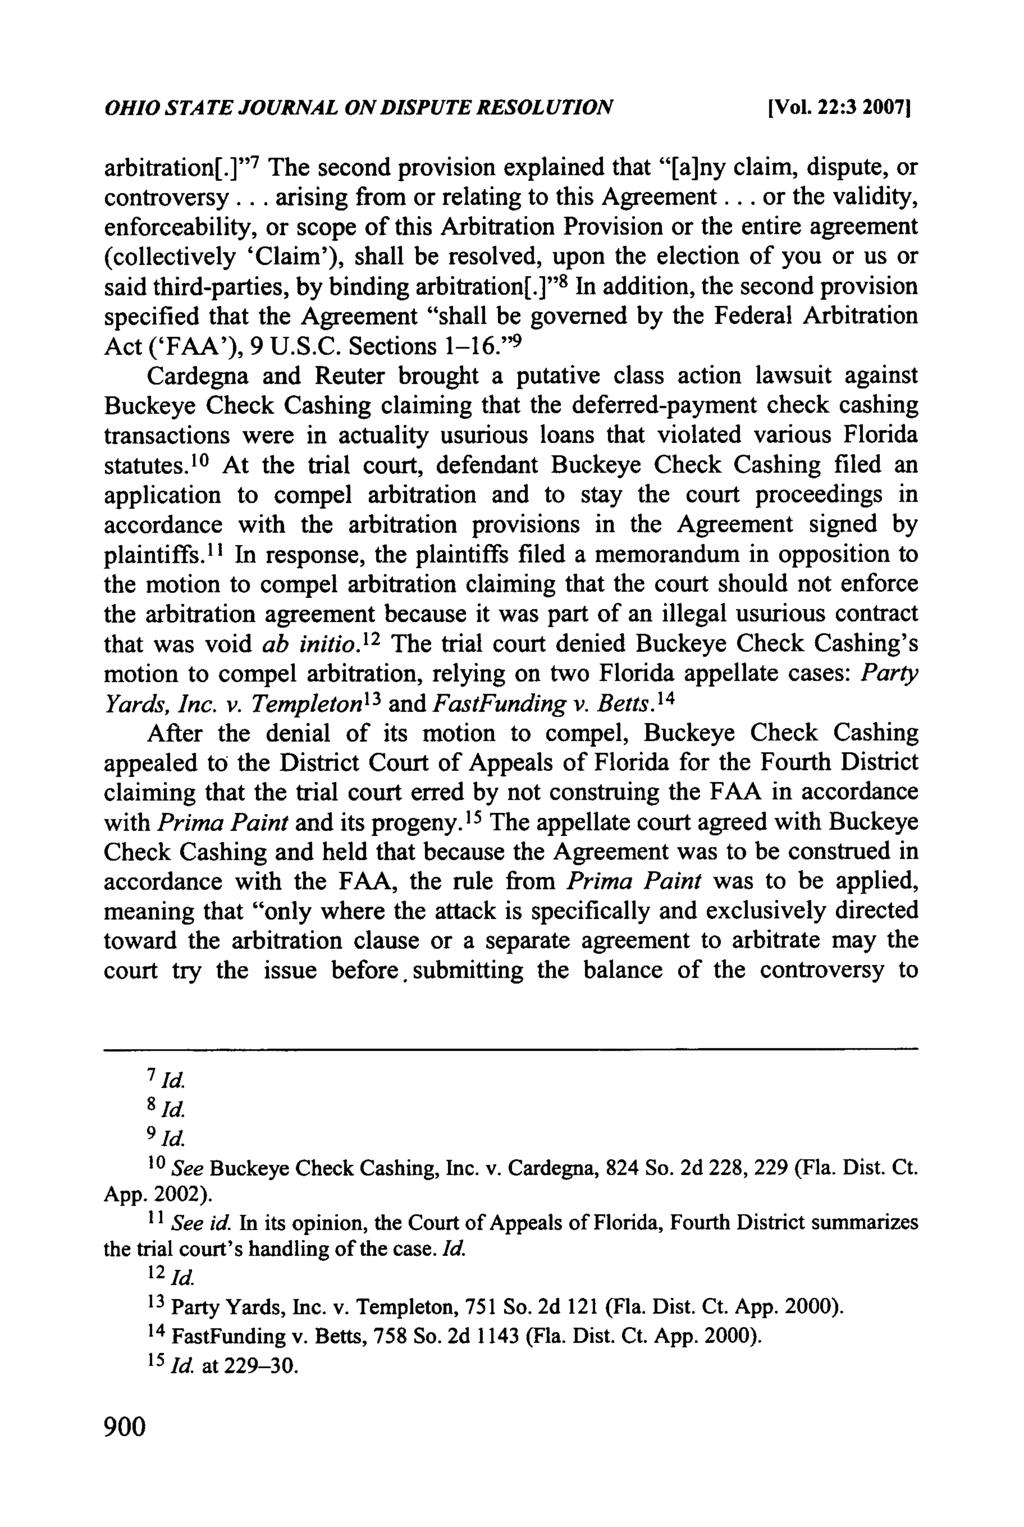 OHIO STATE JOURNAL ON DISPUTE RESOLUTION [Vol. 22:3 20071 arbitration[.] ' '7 The second provision explained that "[a]ny claim, dispute, or controversy... arising from or relating to this Agreement.